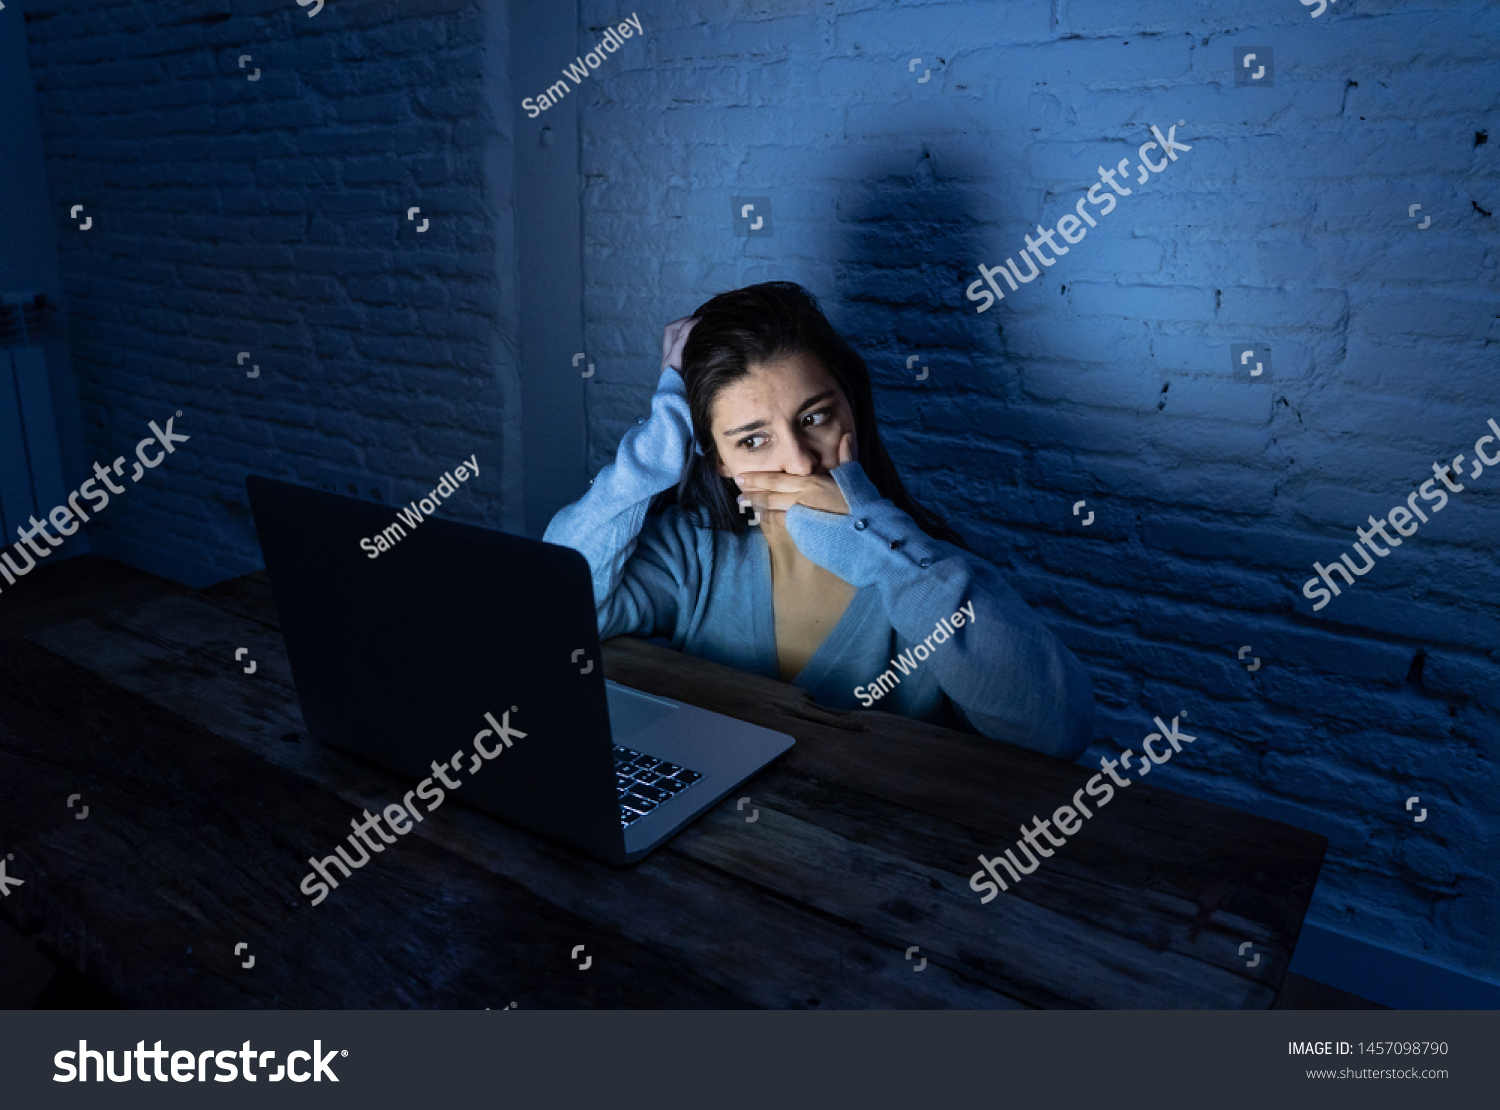 Dramatic portrait of sad scared young woman stressed and worried staring at laptop suffering cyber bullying and harassment. Victim of online abuse and intimidation by stalker. In dangers of internet. #1457098790